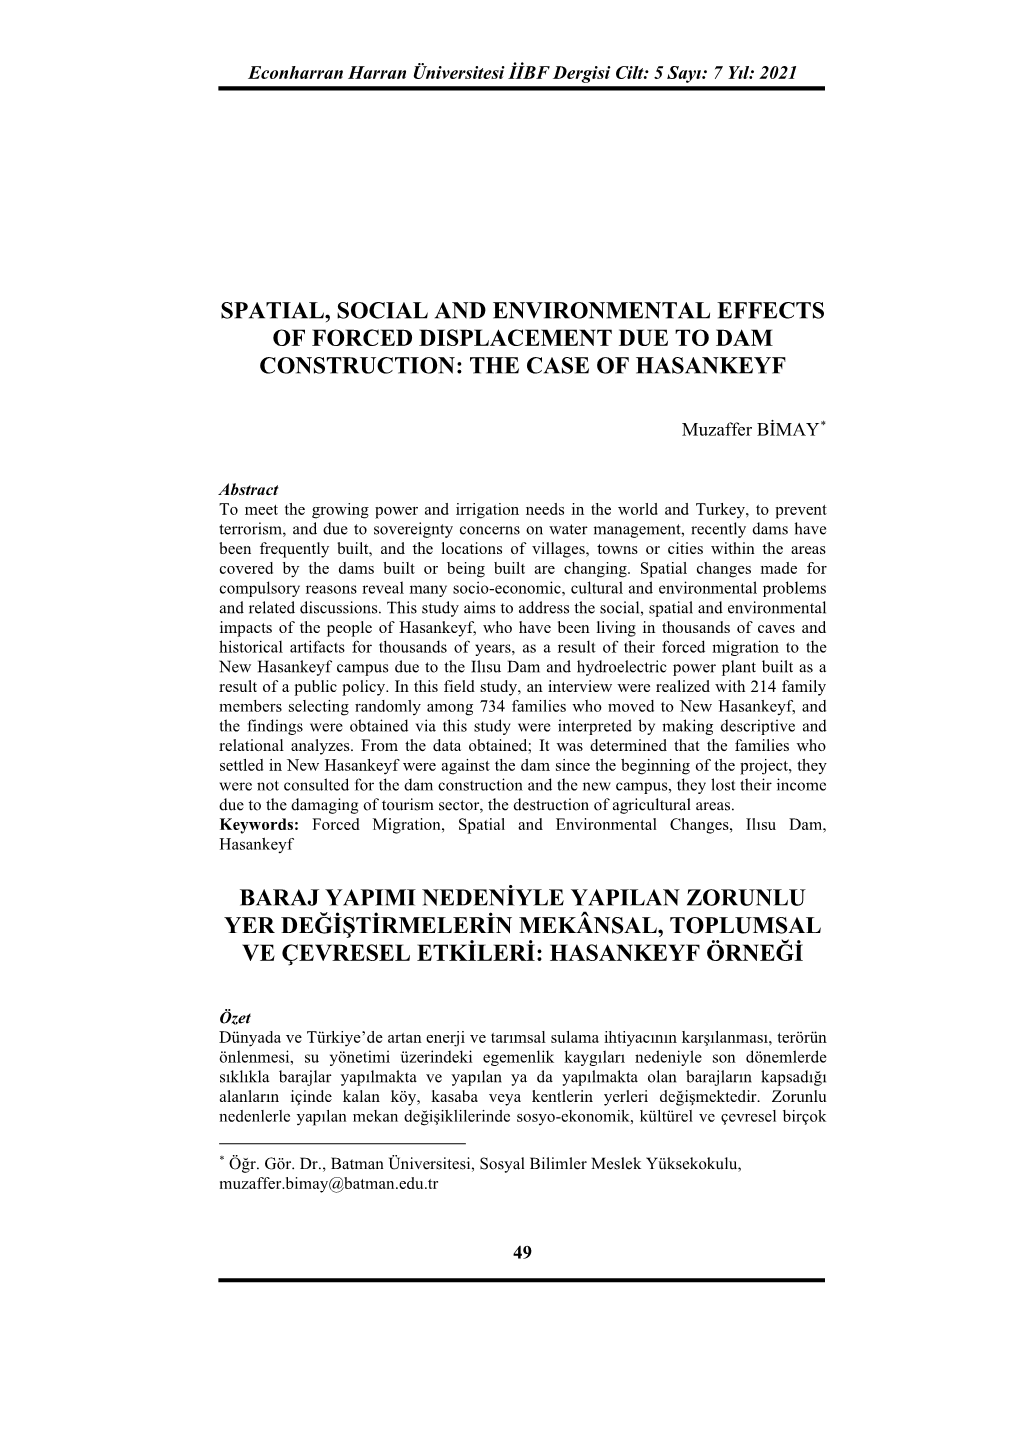 Spatial, Social and Environmental Effects of Forced Displacement Due to Dam Construction: the Case of Hasankeyf